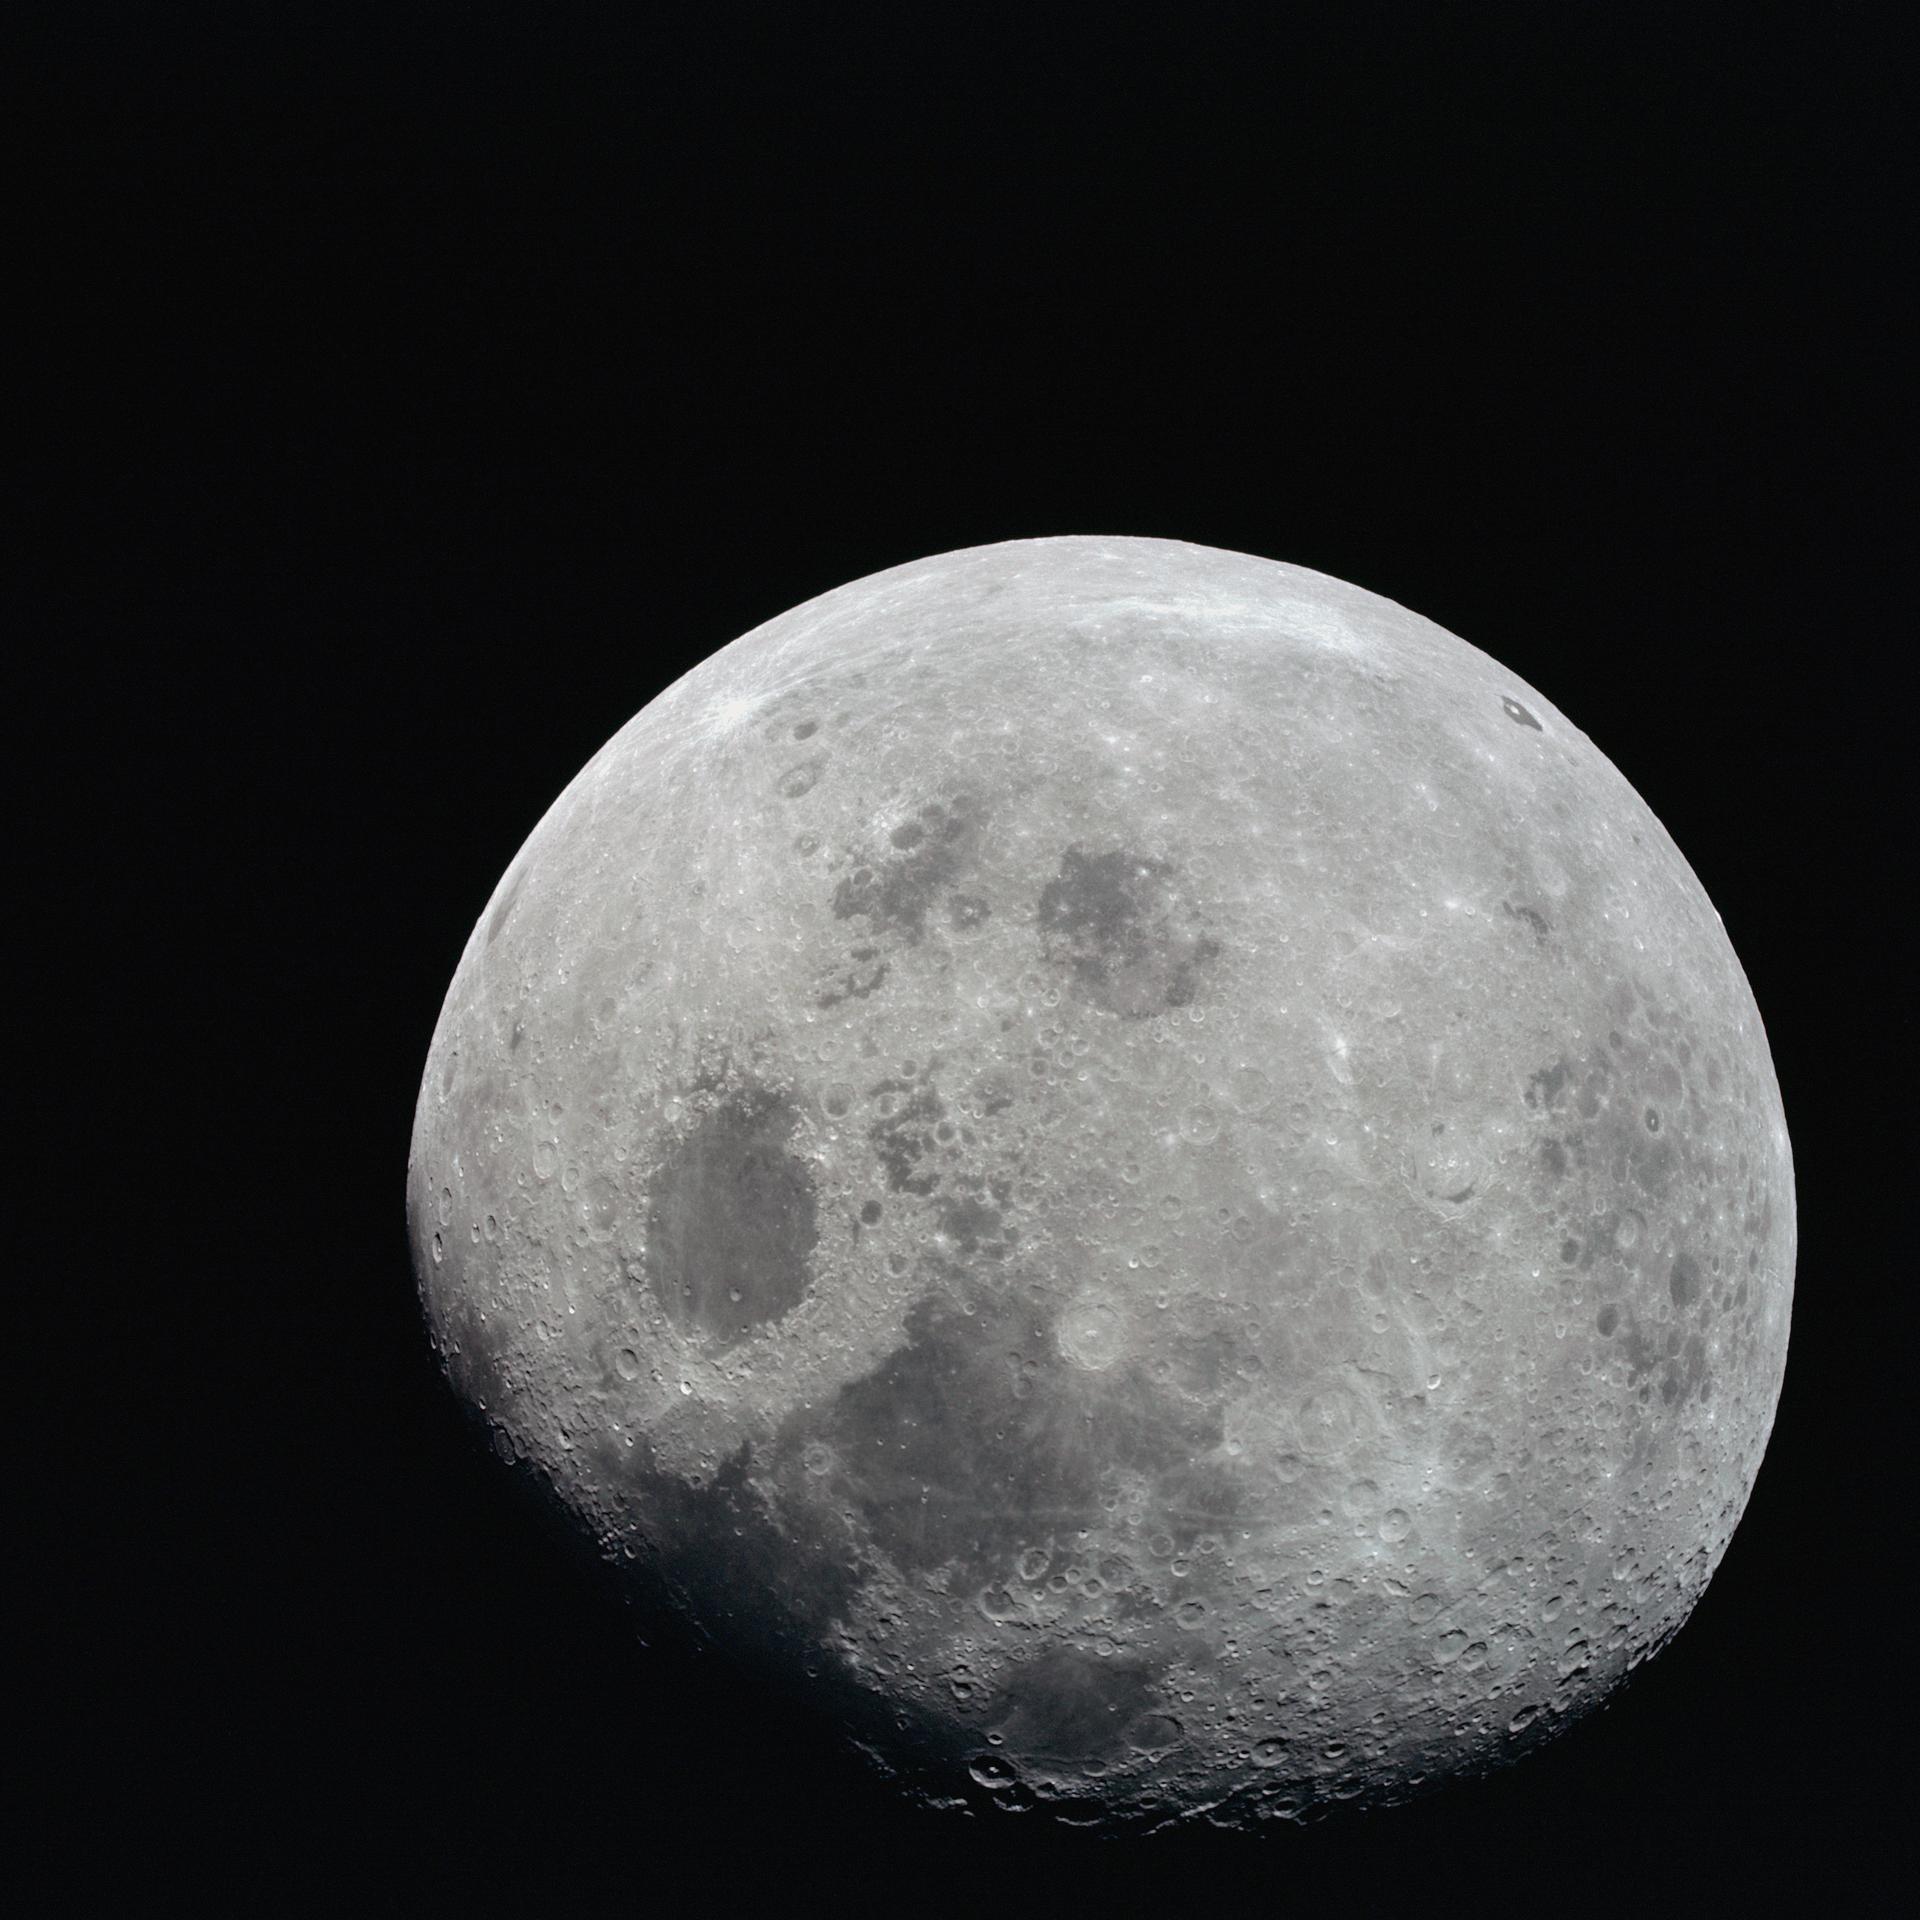 Mare Crisium, the circular, dark-colored area near the center, is near the eastern edge of the moon as viewed from Earth. 